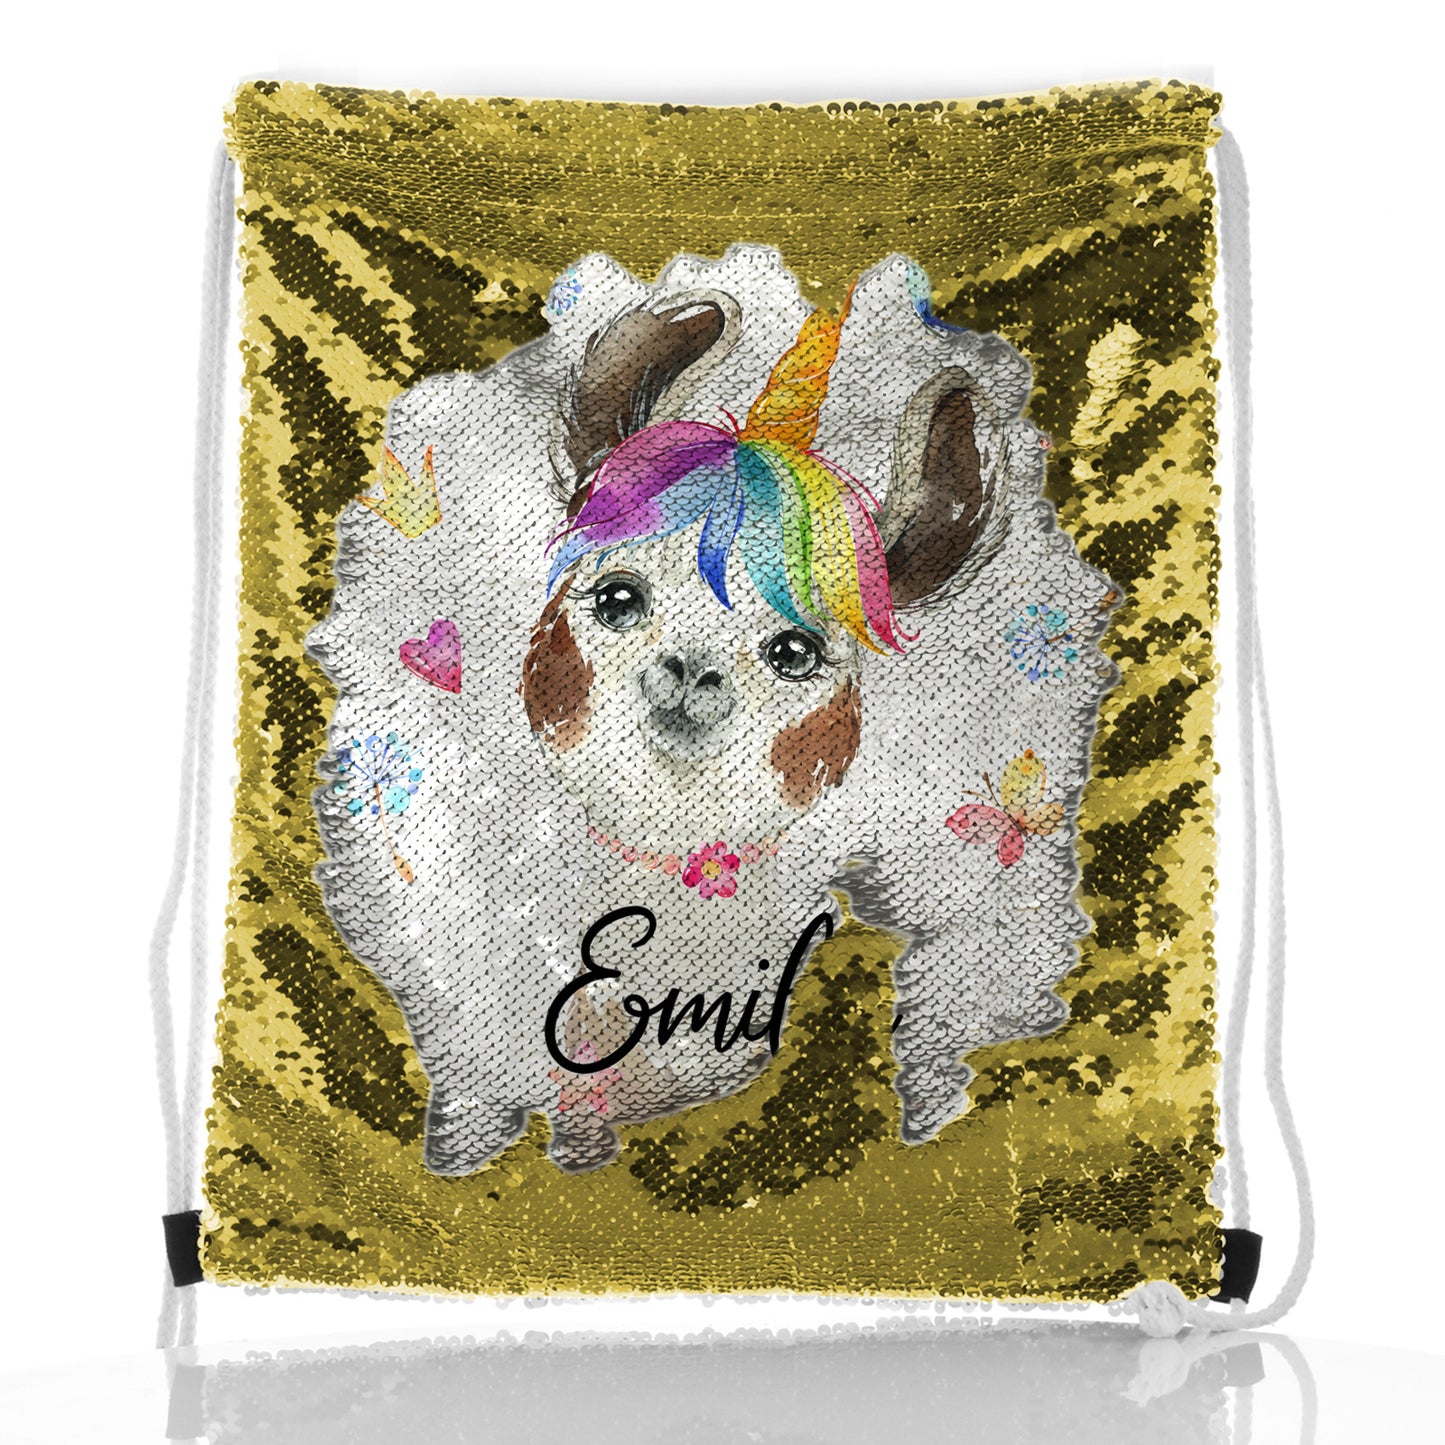 Personalised Sequin Drawstring Backpack with Alpaca Unicorn with Rainbow Hair Hearts Stars and Cute Text